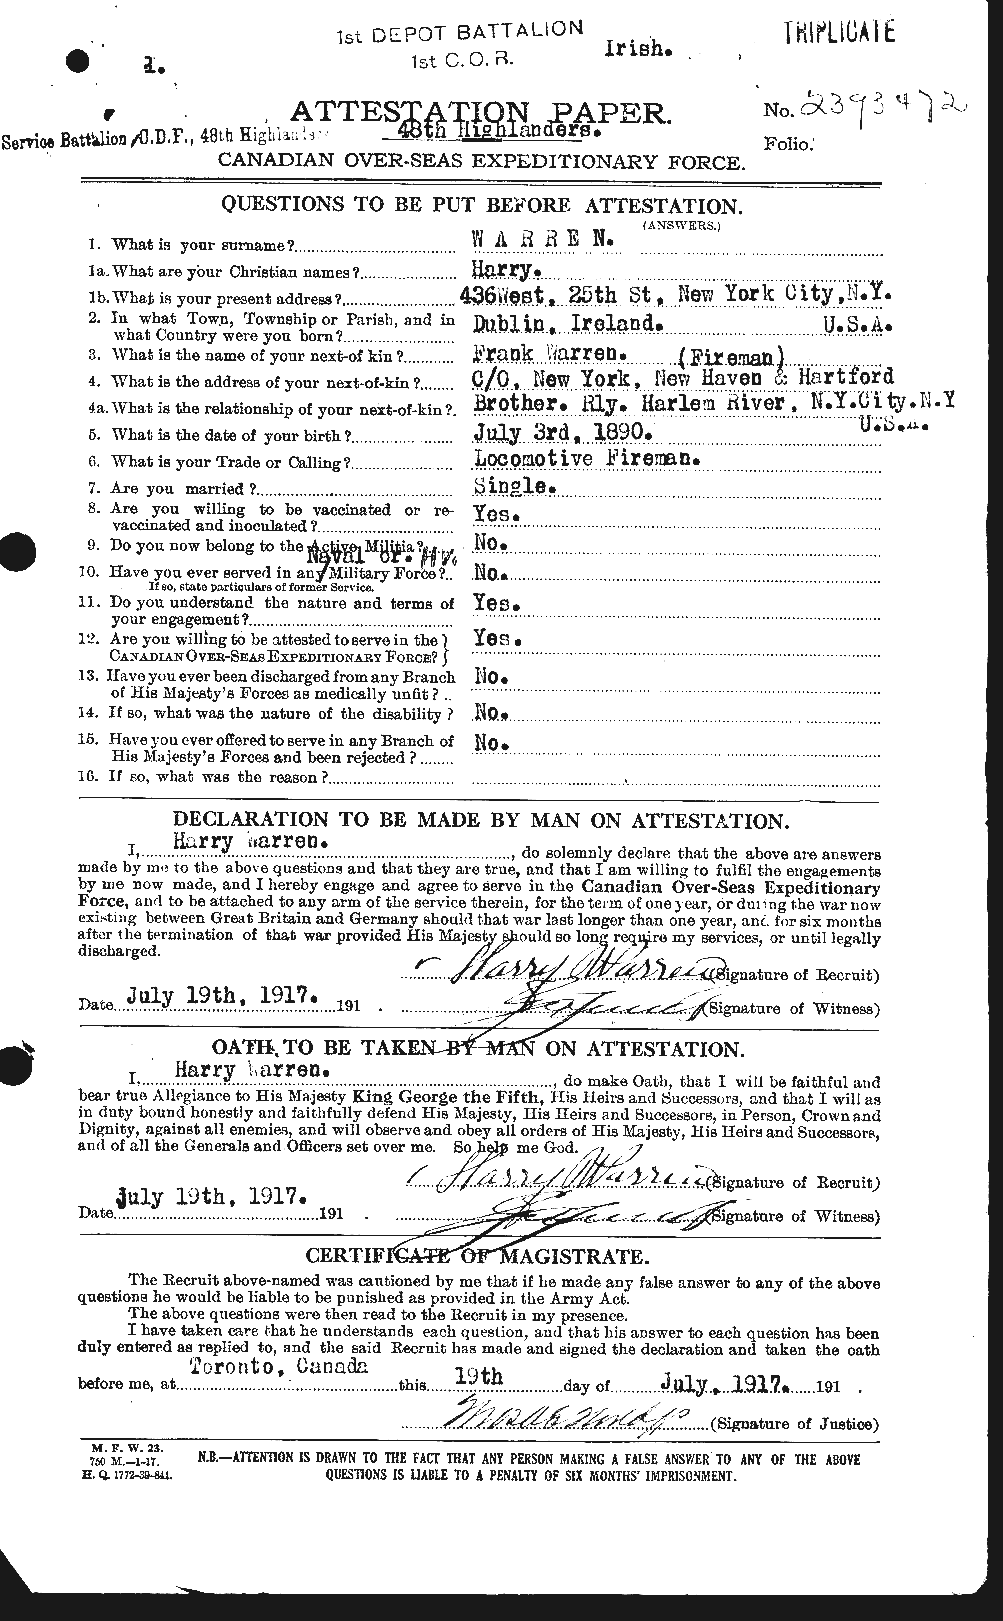 Personnel Records of the First World War - CEF 658482a